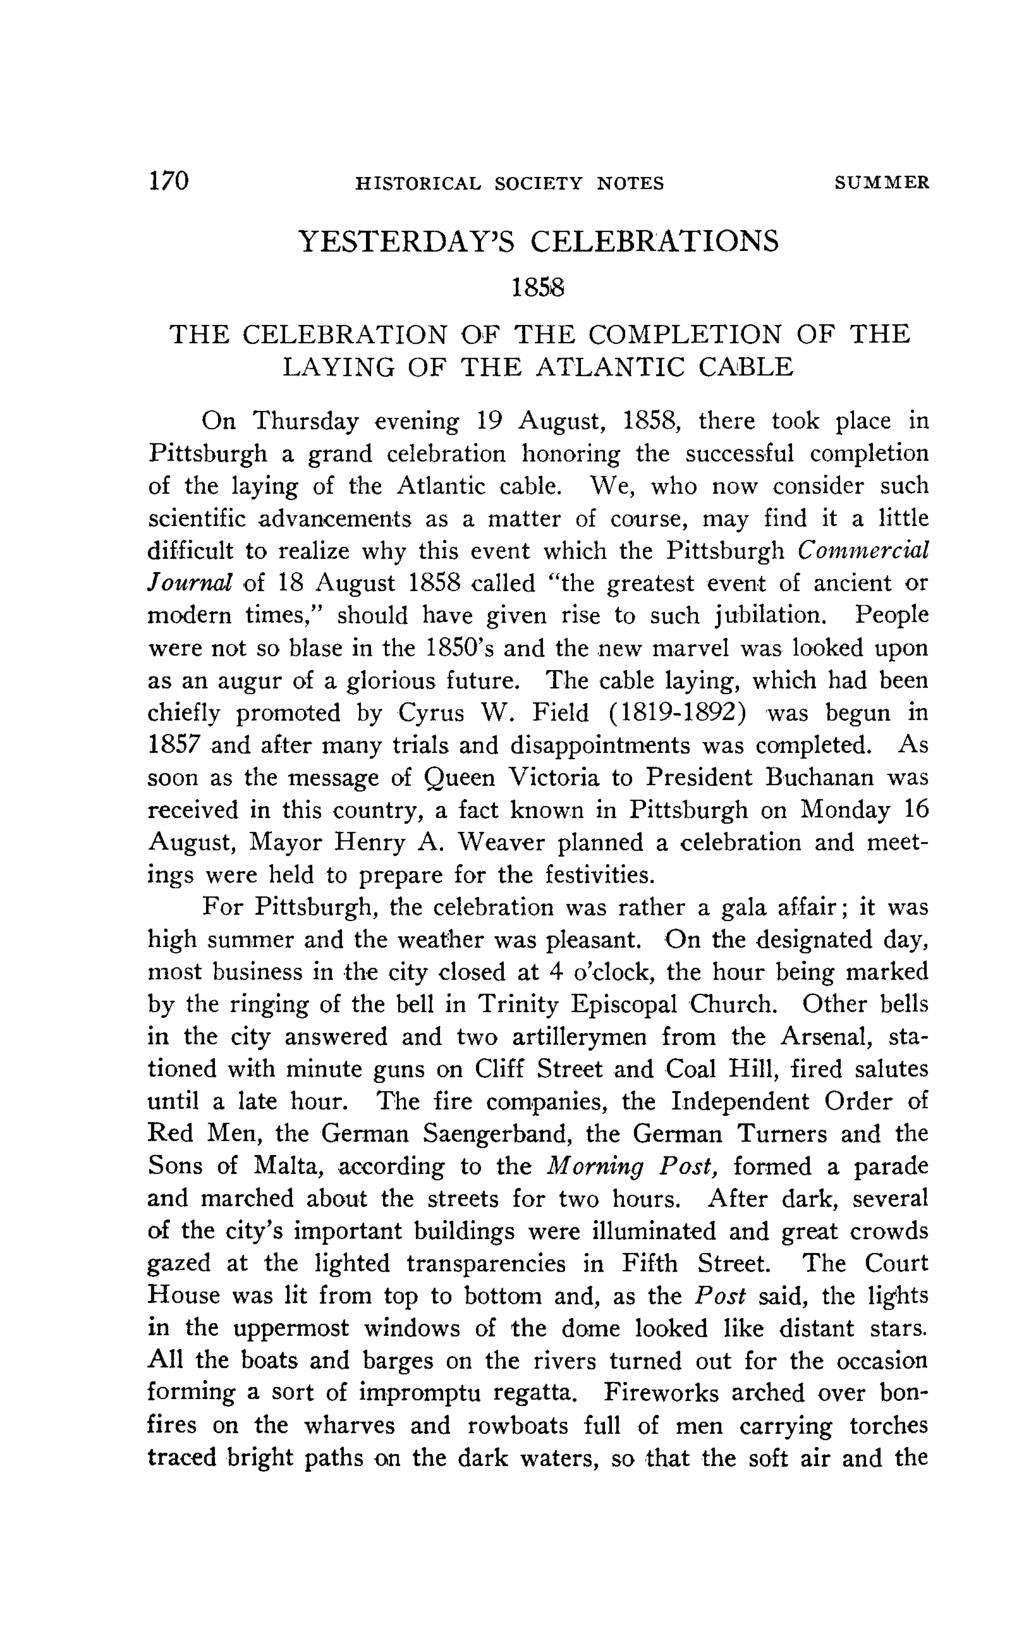 170 HISTORICAL SOCIETY NOTES SUMMER YESTERDAY'S CELEBRATIONS 1858 THE CELEBRATION OF THE COMPLETION OF THE LAYING OF THE ATLANTIC CABLE On Thursday evening 19 August, 1858, there took place in